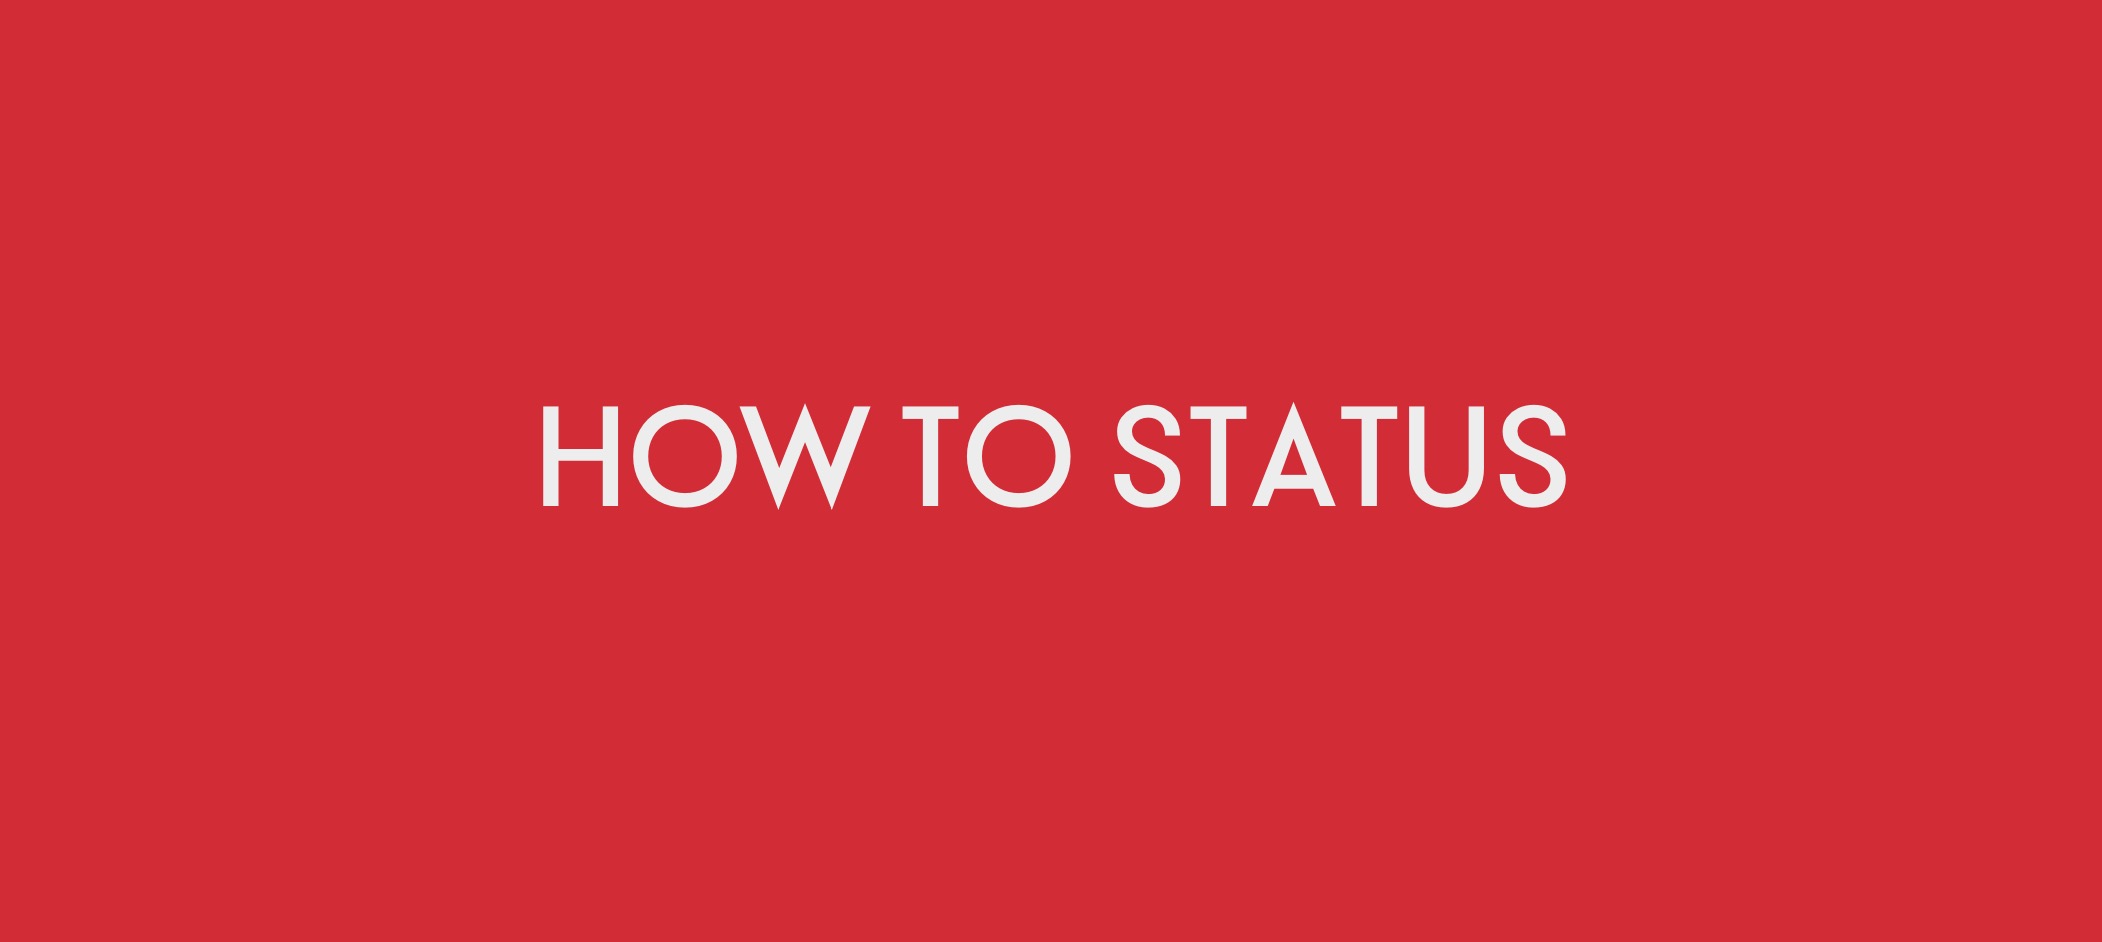 How to Status